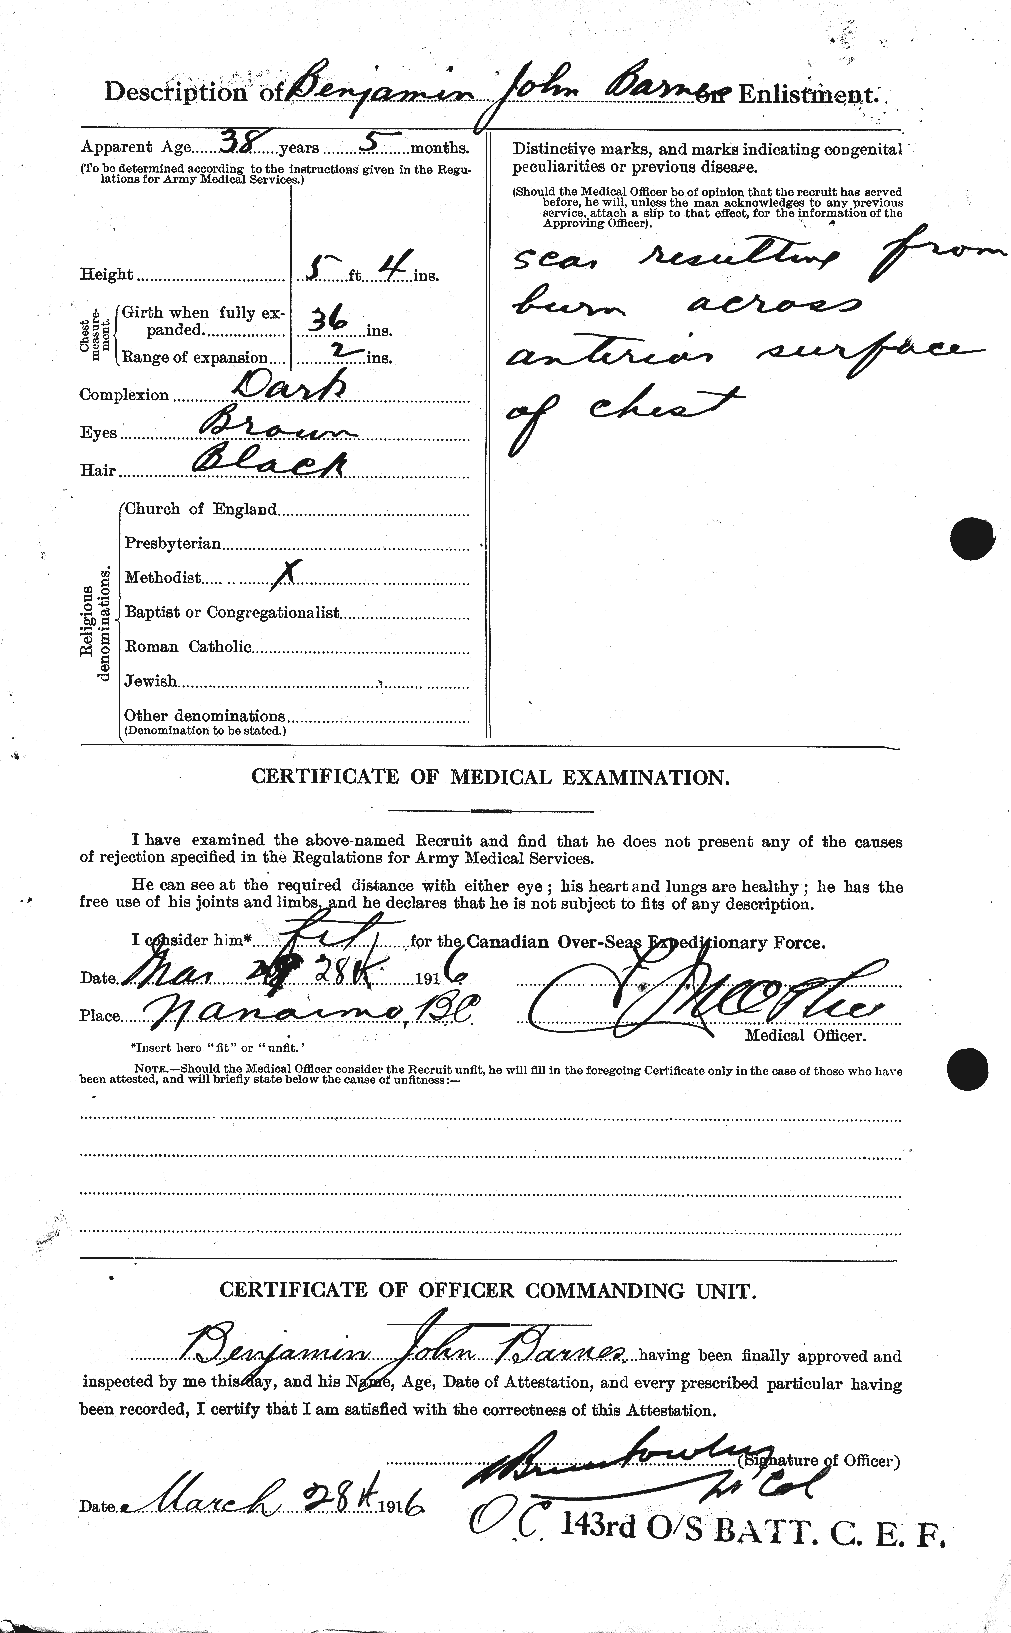 Personnel Records of the First World War - CEF 222642b